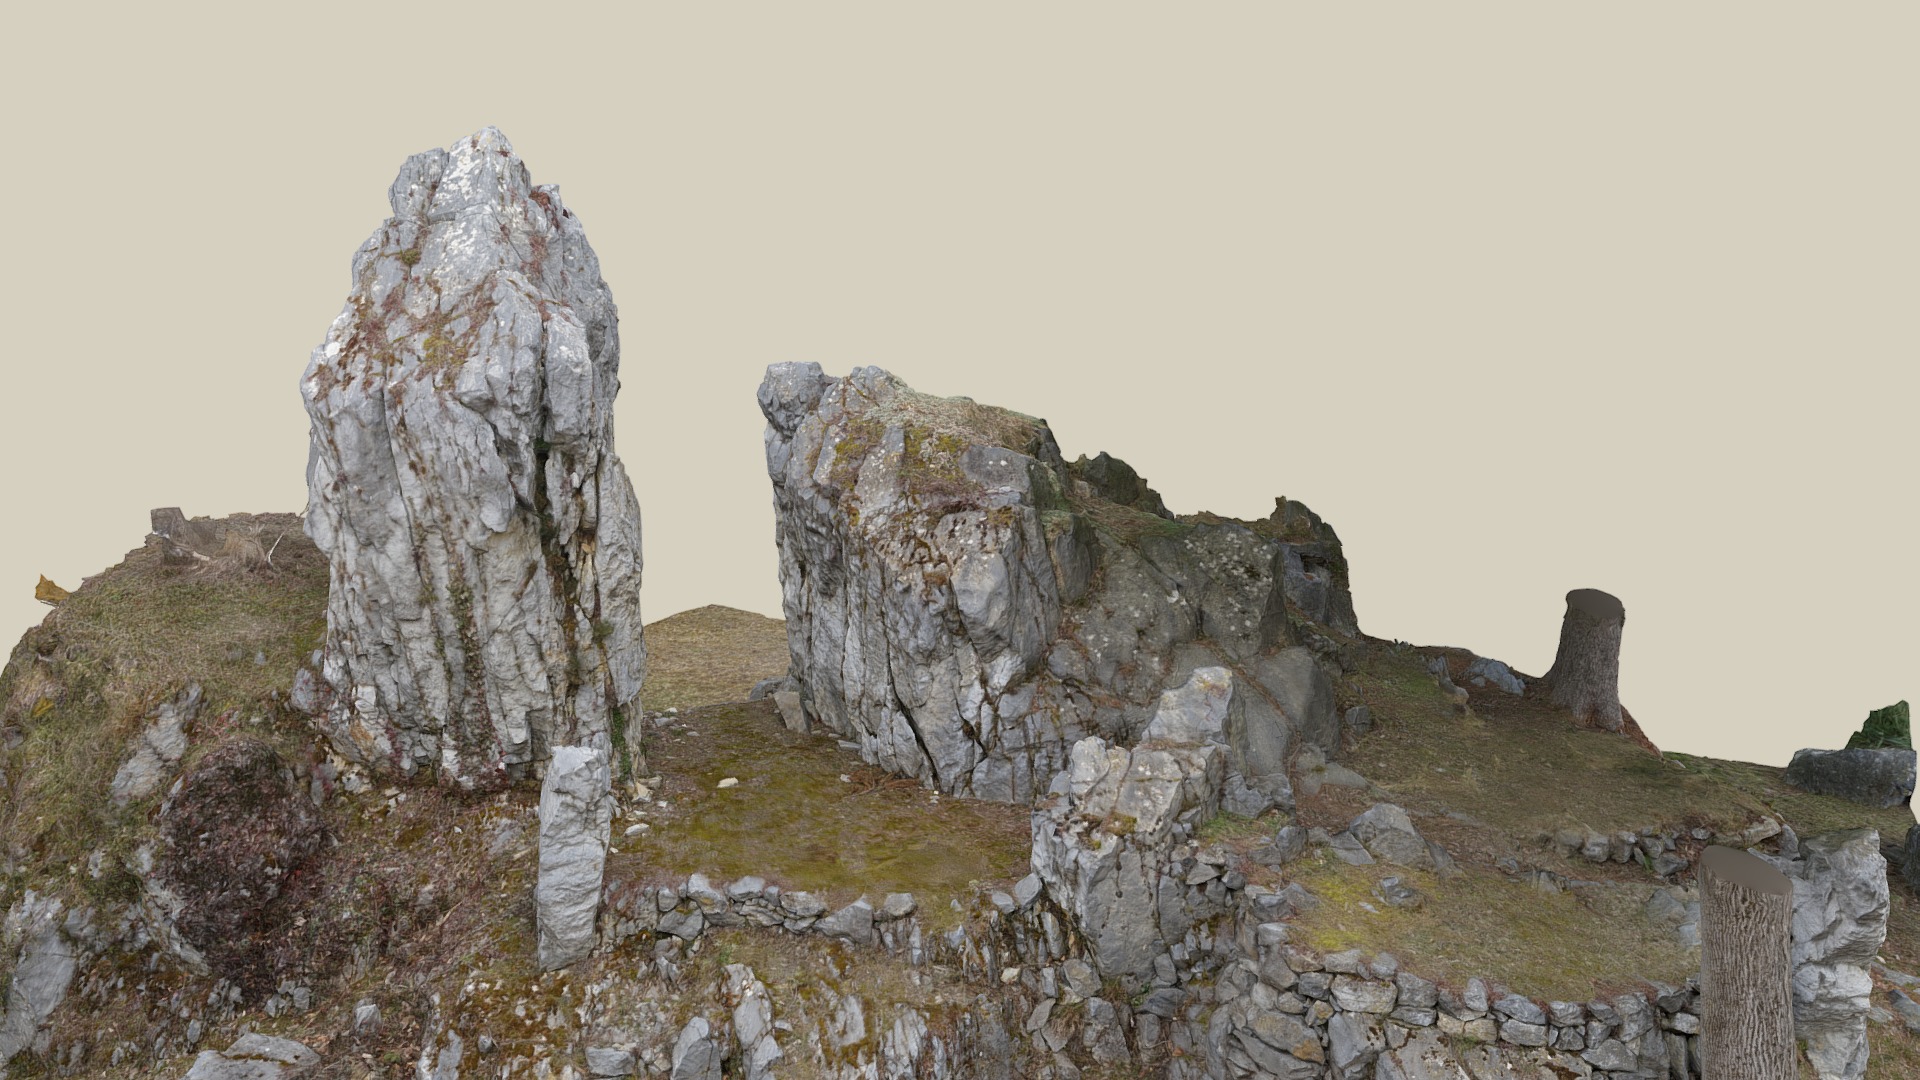 3D model Grotteneingang - This is a 3D model of the Grotteneingang. The 3D model is about a rocky mountain with a few large rocks on top.